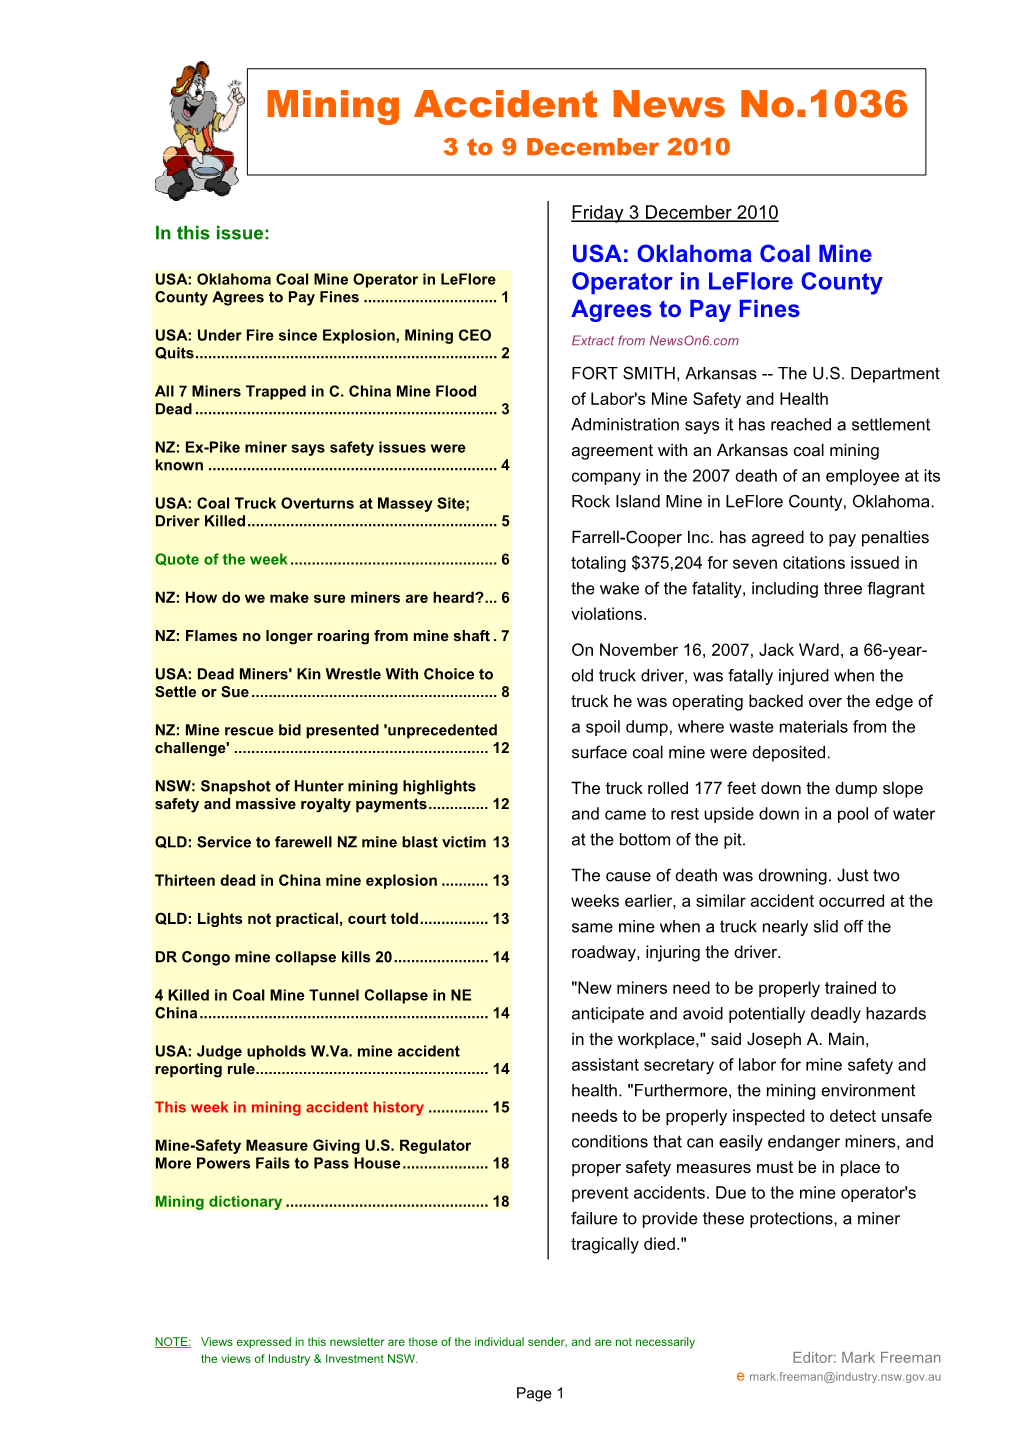 Mining Accident News No.1036 3 to 9 December 2010